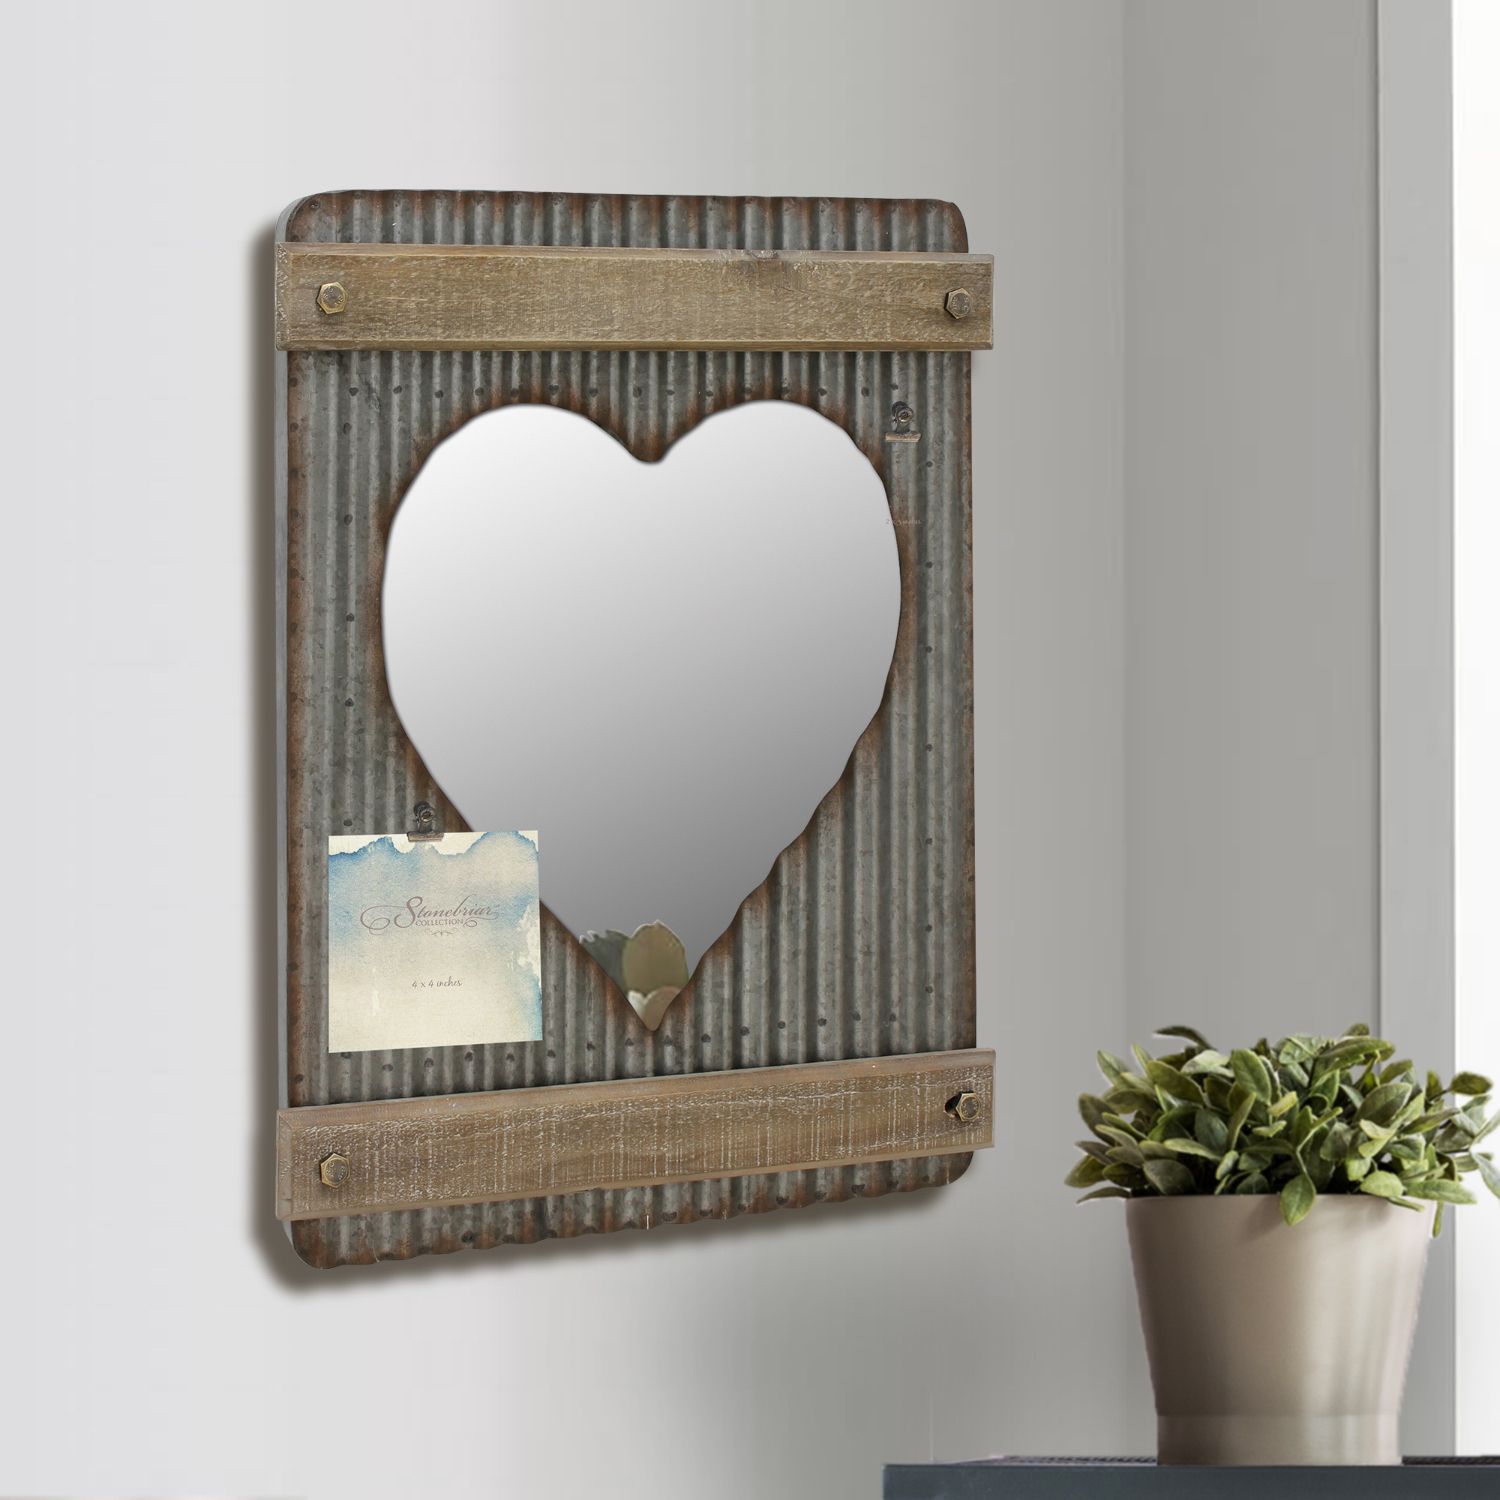 Magnetic Corrugated Metal And Wood Heart Shaped Wall Mirror Decor, Home Intended For 2018 Metal Mirror Wall Art (View 19 of 20)